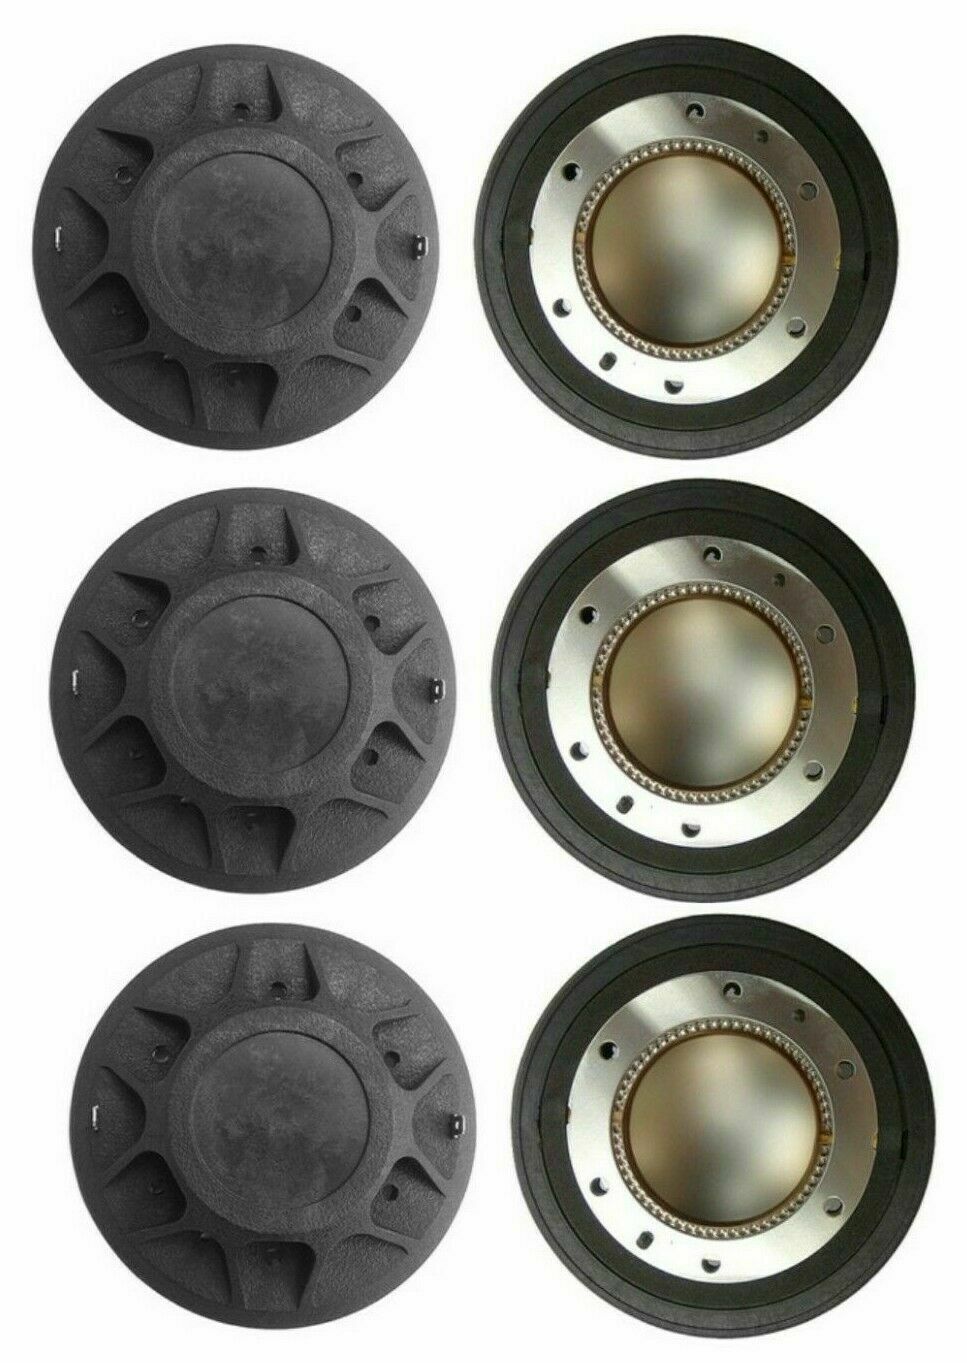 3 Replacement Diaphragm For Peavey 22 Series Drivers: 22XT, 22XT+, 22XTRD, 22T, 22A, 2200, and more